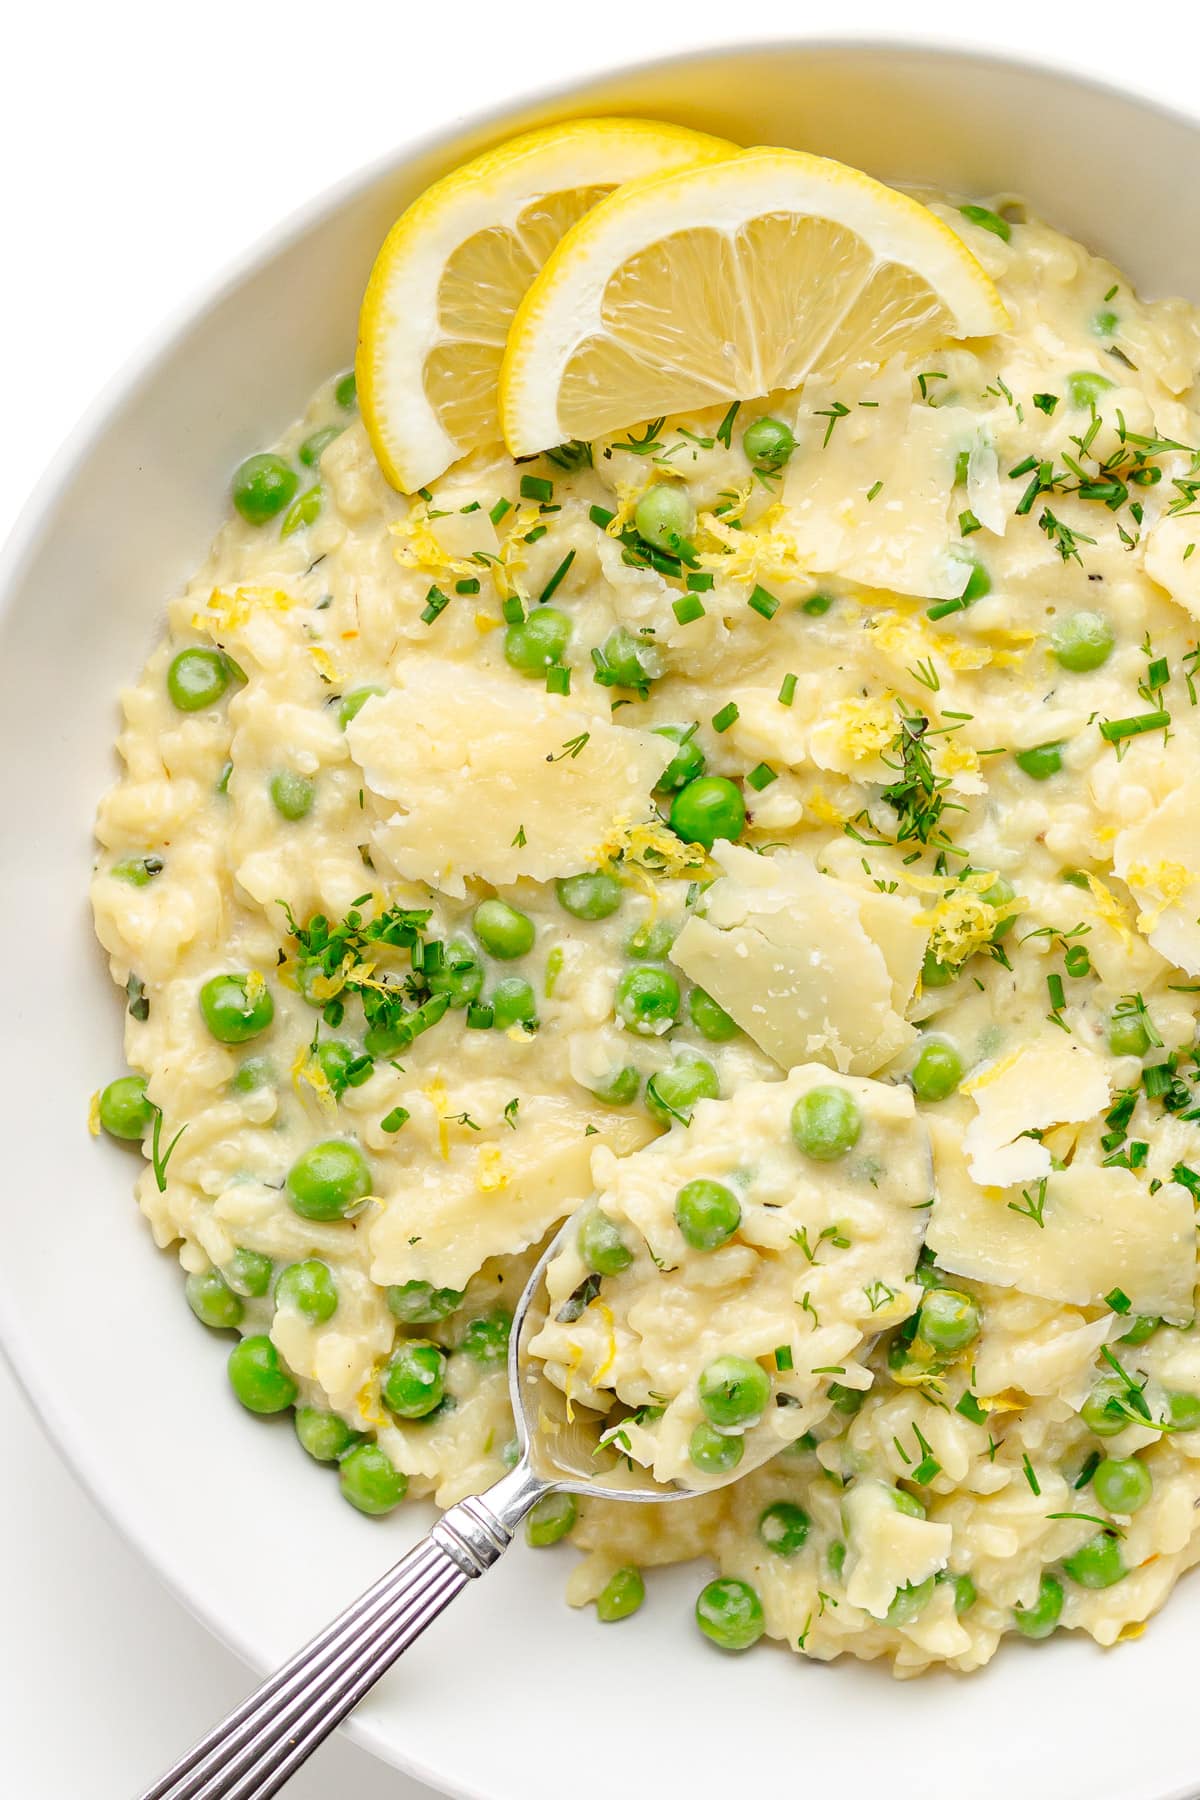 Pea risotto in a white bowl garnished with lemon slices.